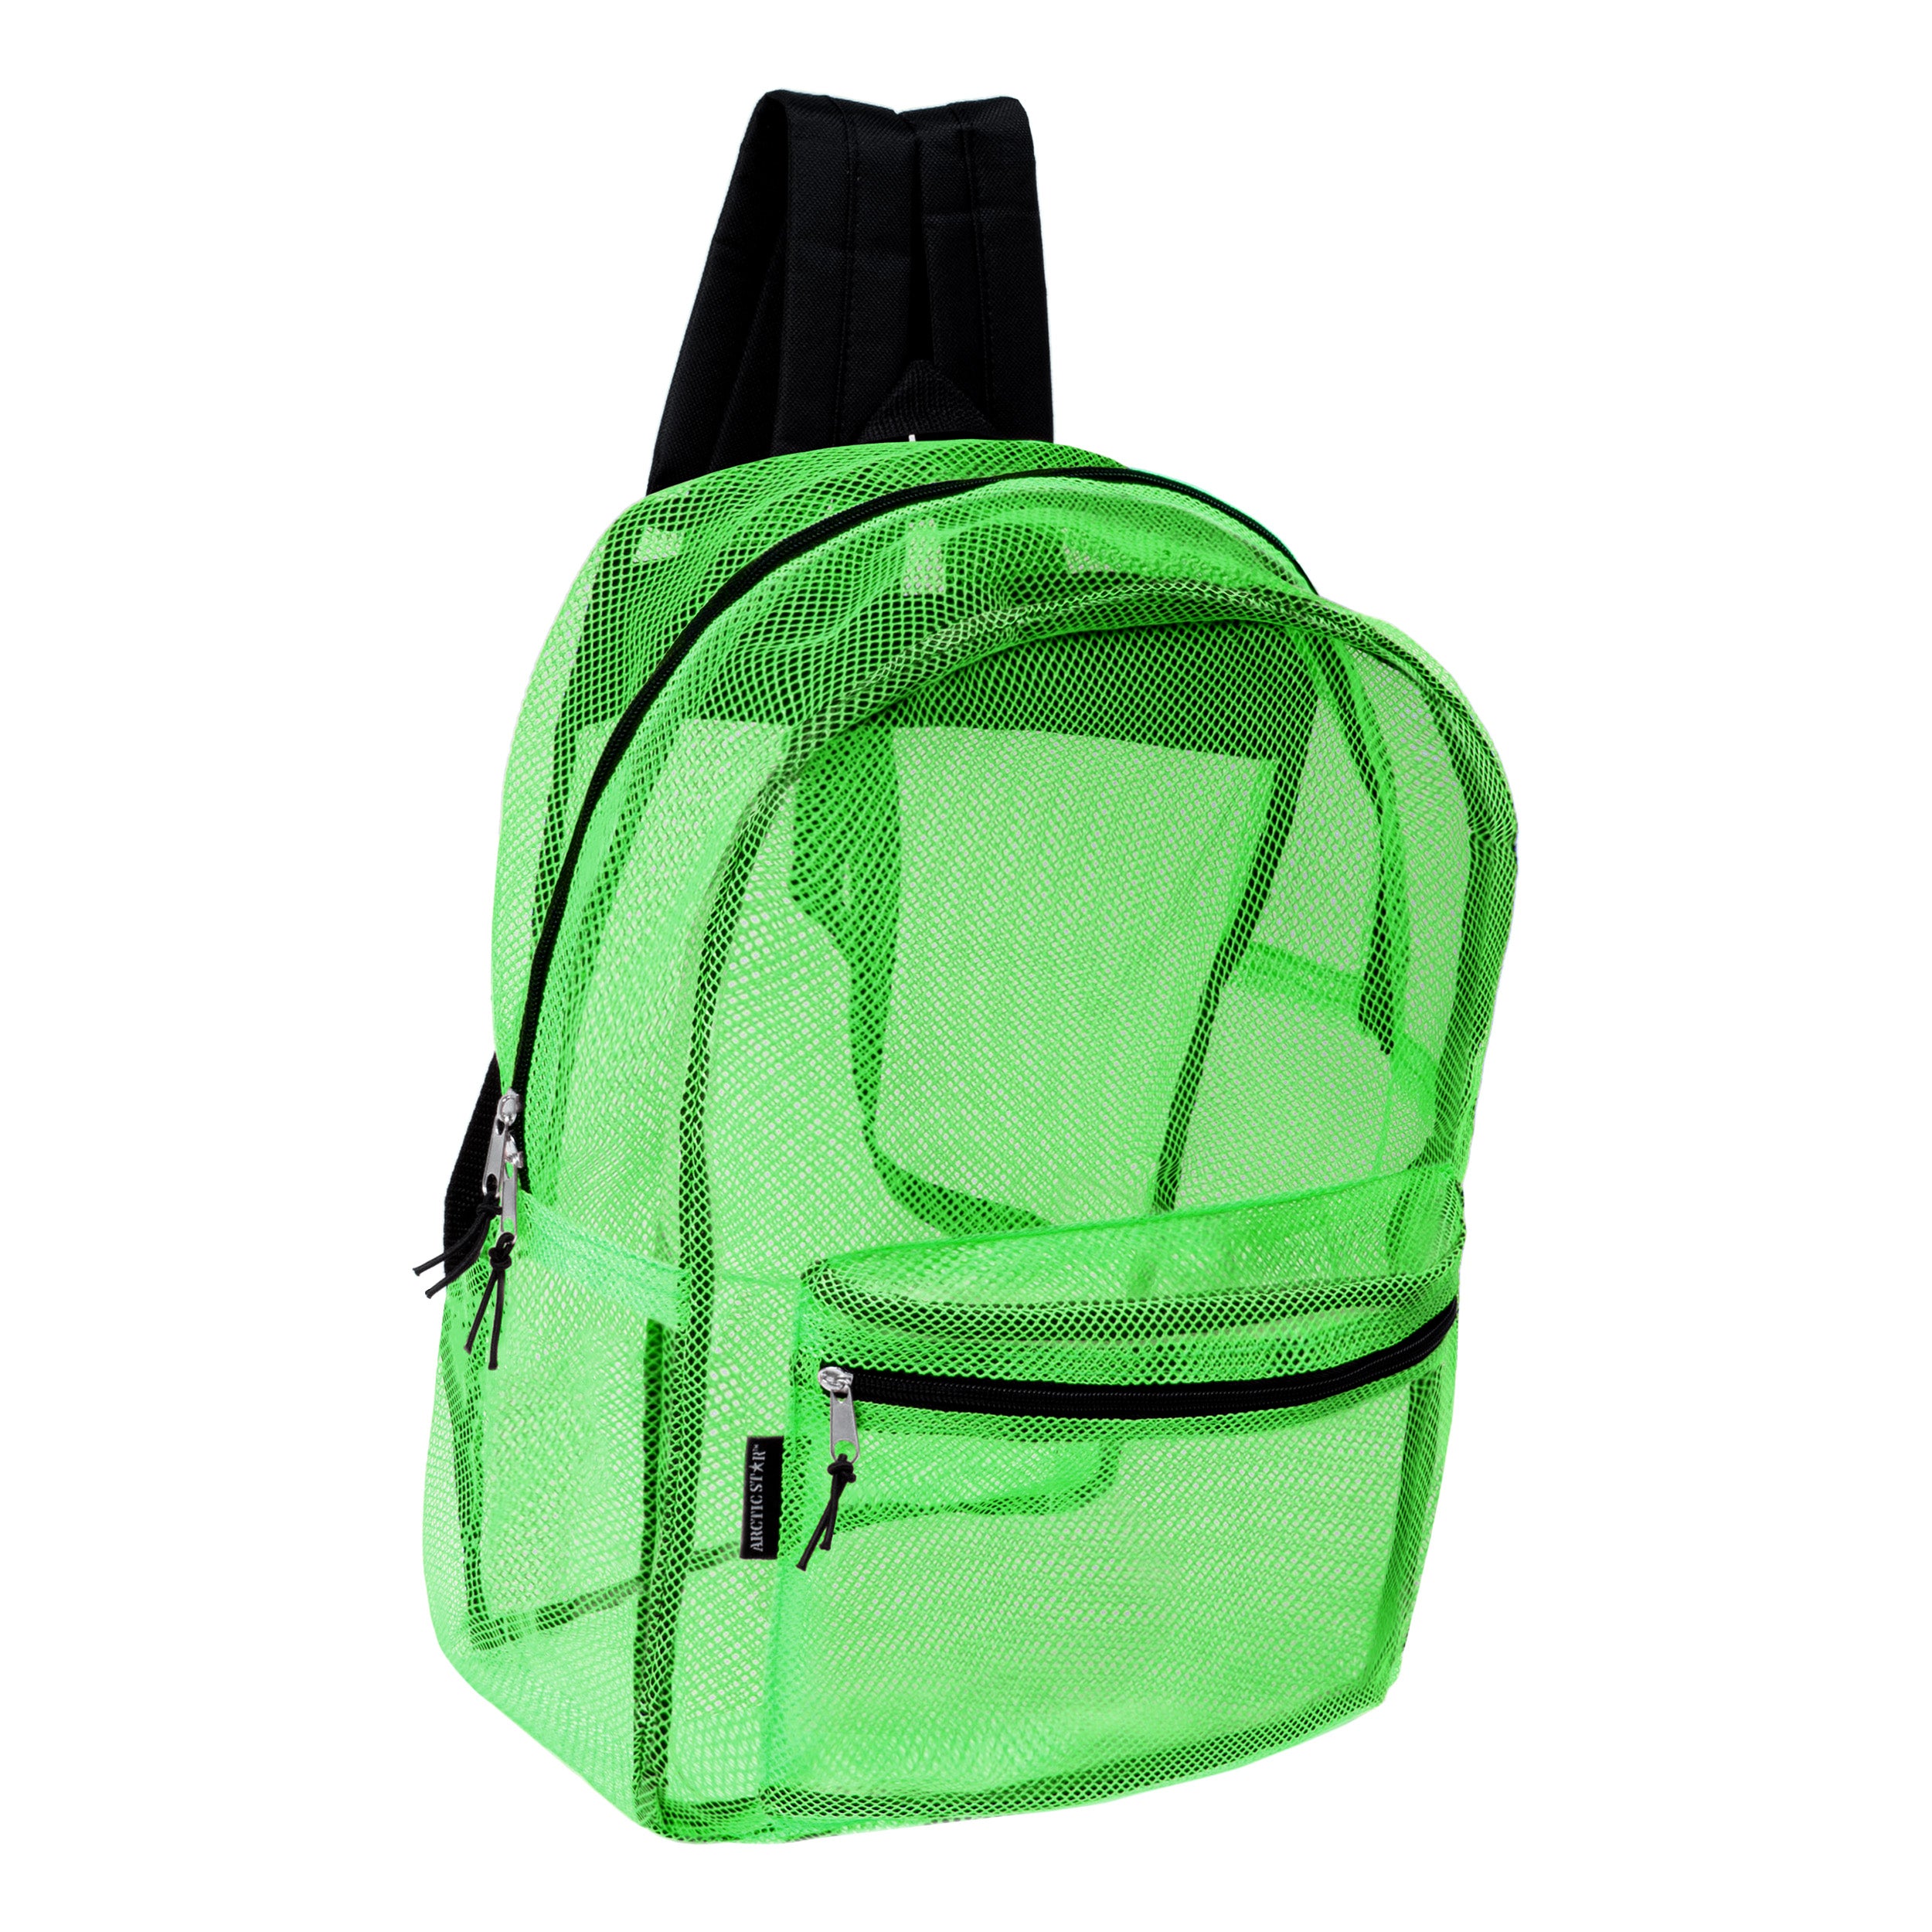 Mesh Wholesale Backpacks in 6 Assorted Colors - Case of 24 Bookbags